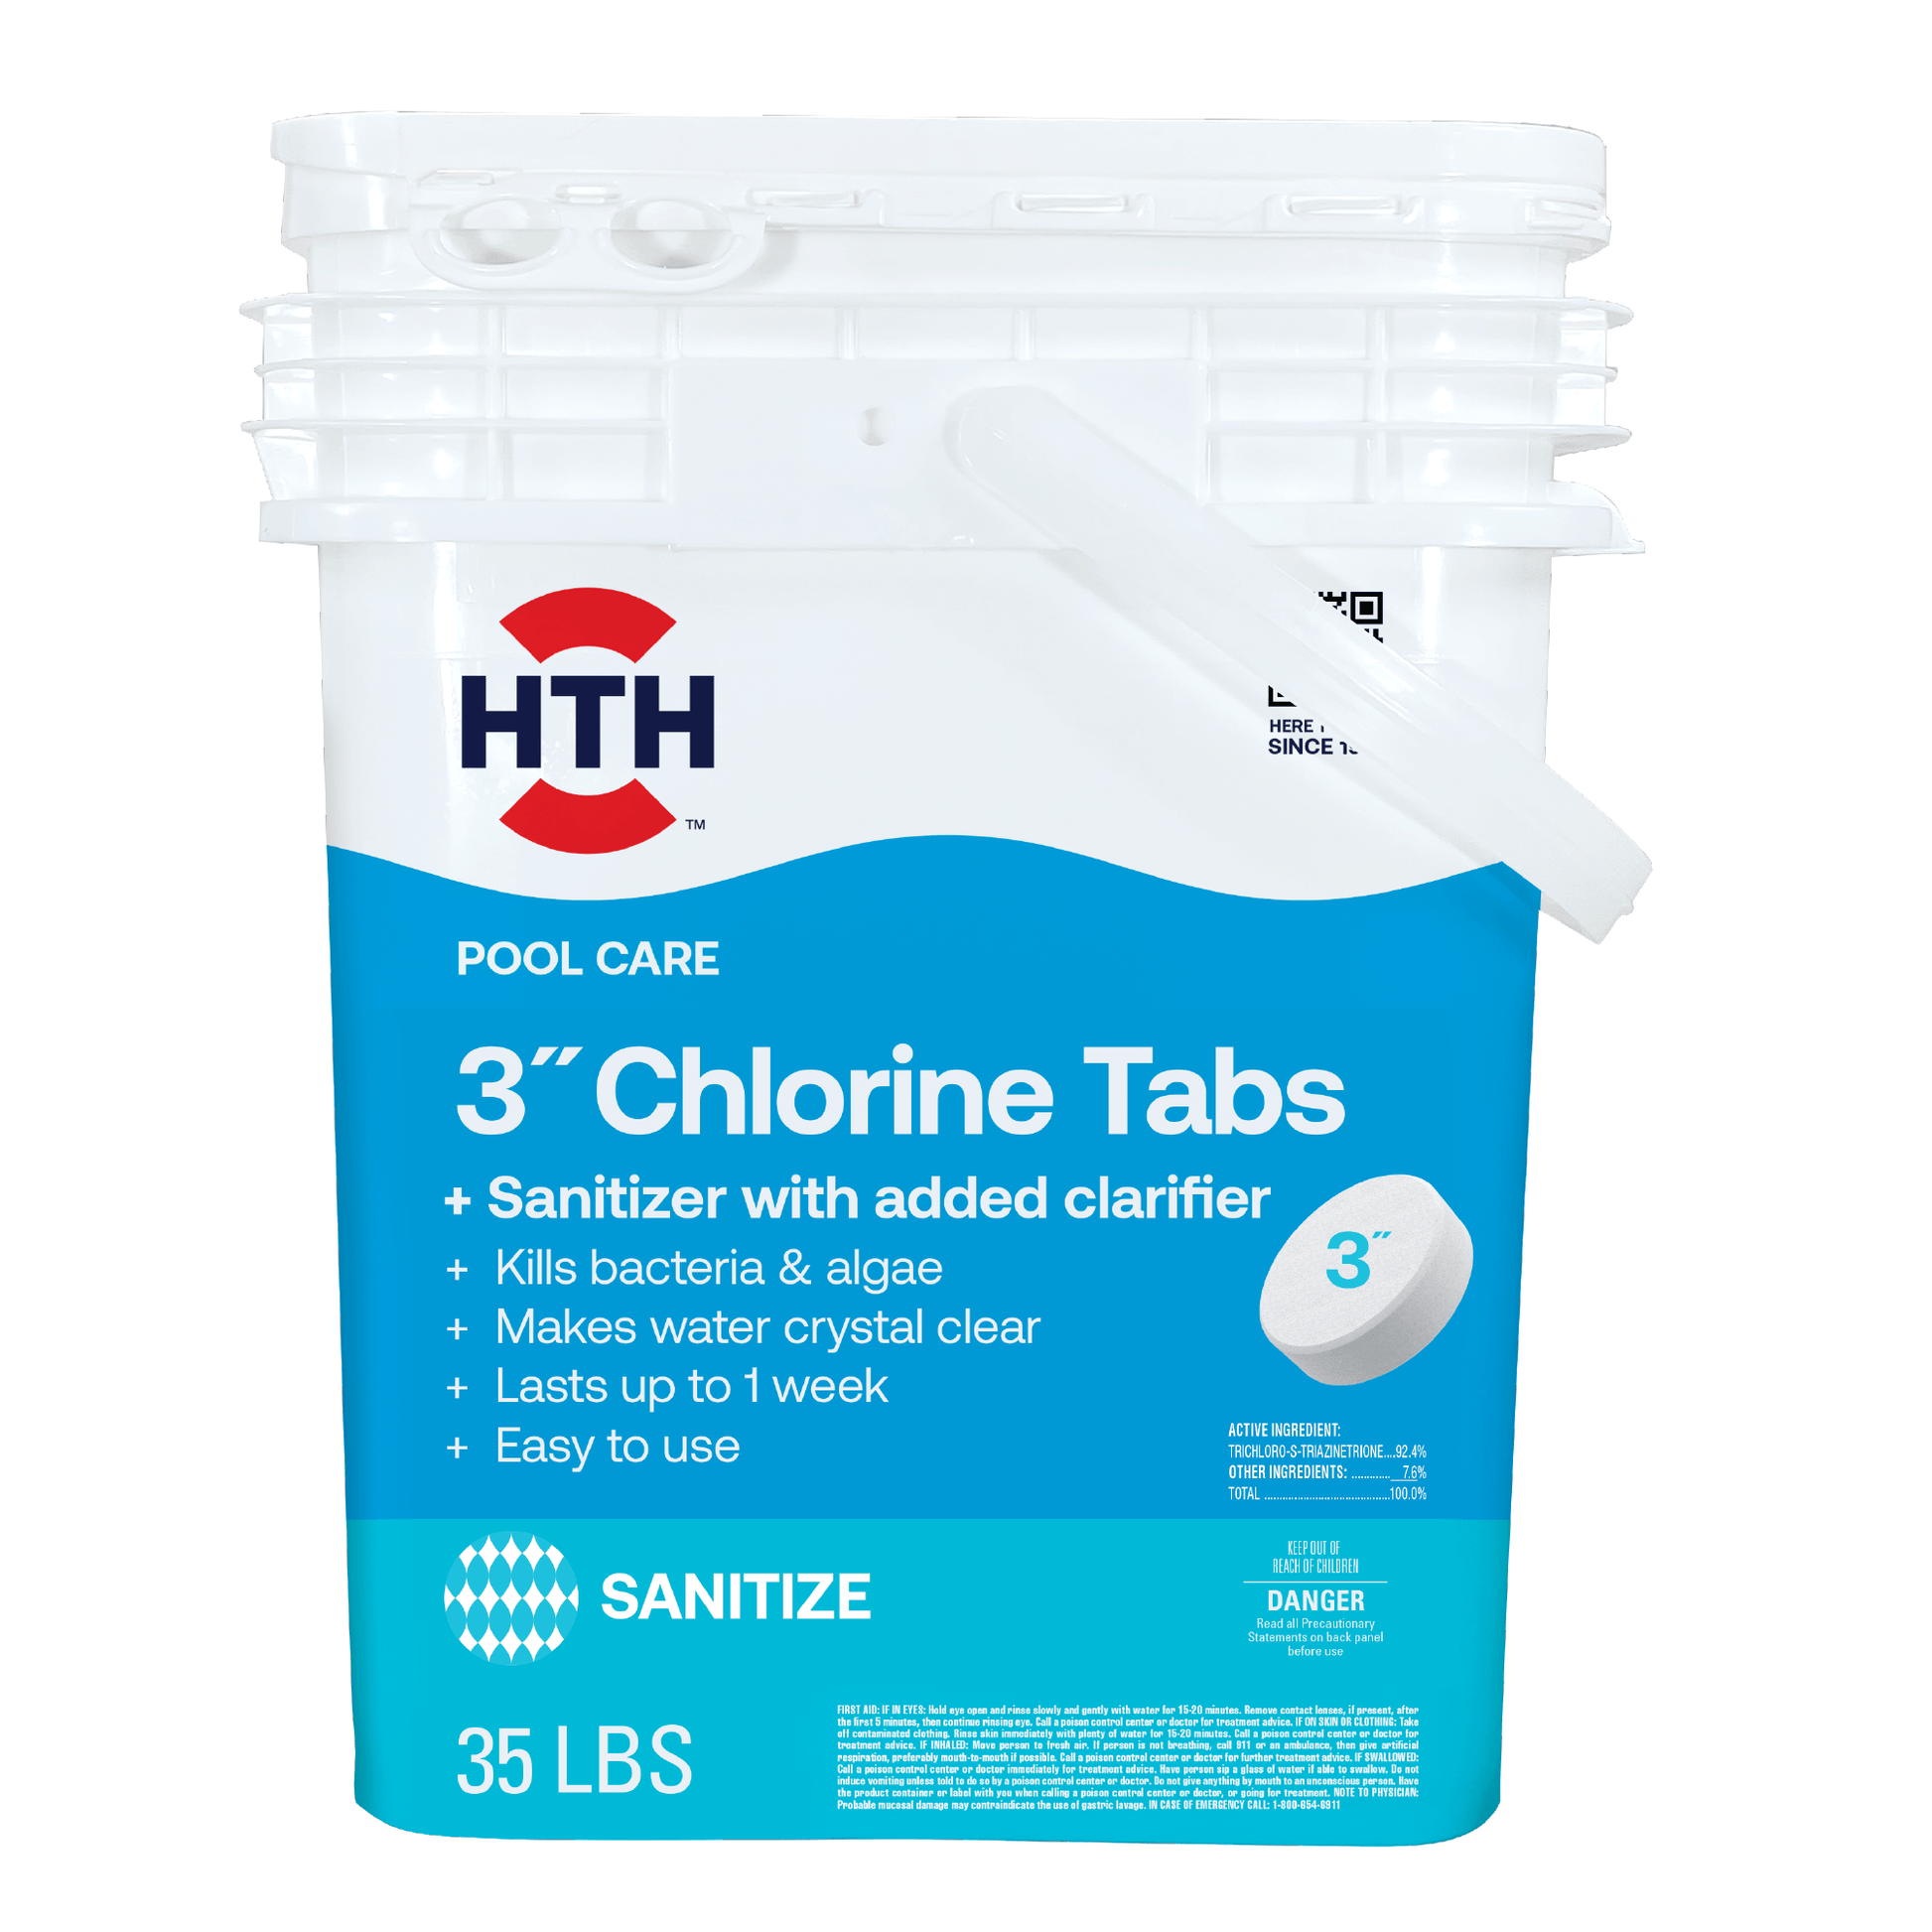 Chlorine tablets info, FAQ's and blogs. All information can be found here.